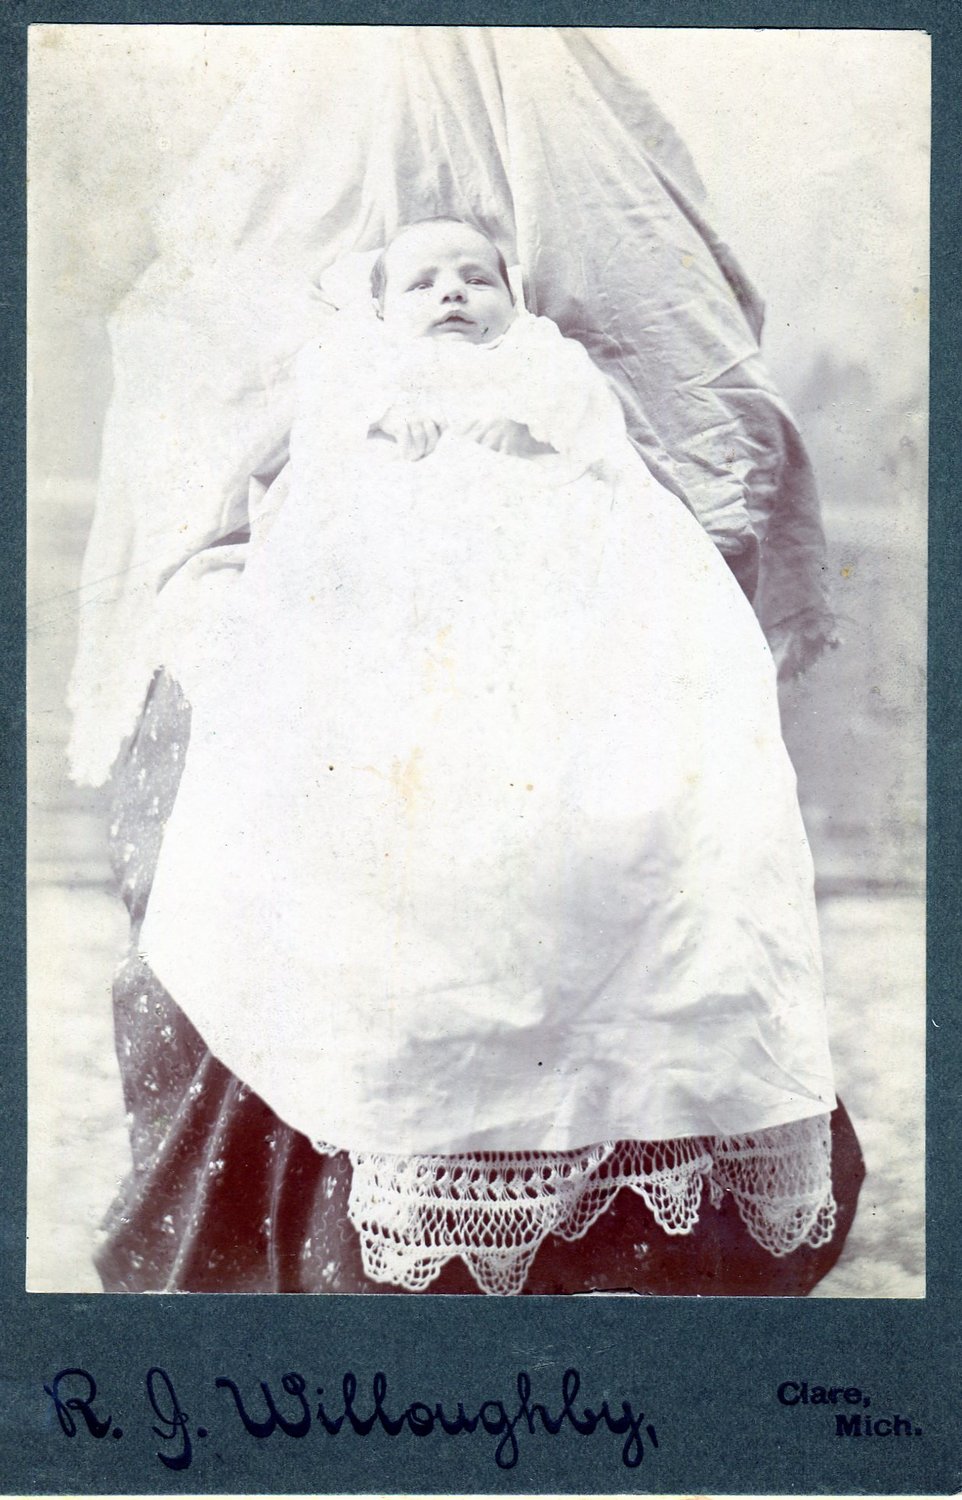 This ‘hidden mother’ photo was taken in Clare by photographer Robert Willoughby. Willoughby operated a studio in Clare from 1898-1904. The child is not identified.

Photos like this are commonly called ‘Hidden mothers’ as mothers stayed covered while holding their child still for long exposure times for early cameras.

Willoughby sold cabinet cards like this for 12 for $1.50.